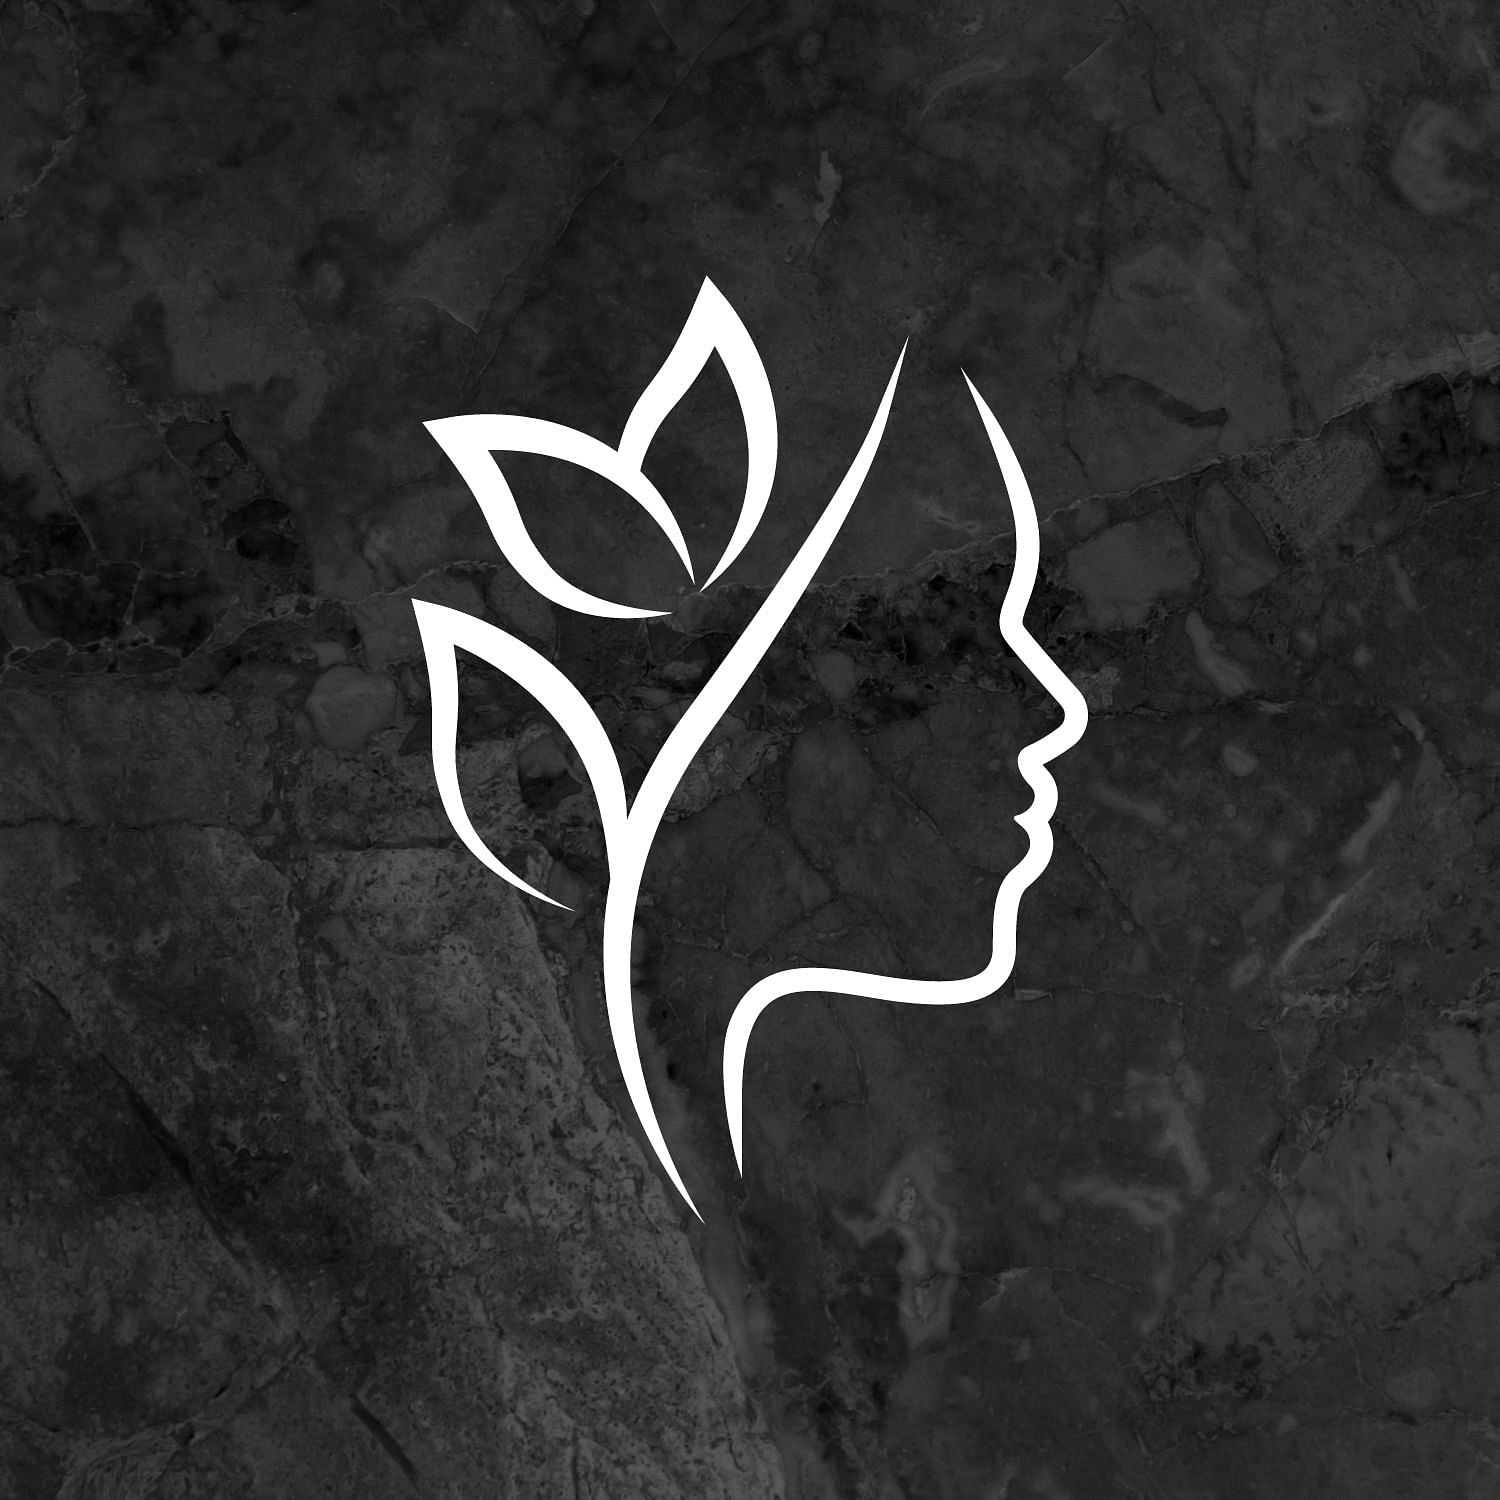 Silhouette of a woman's profile blended with leaf motifs on a dark marble background.